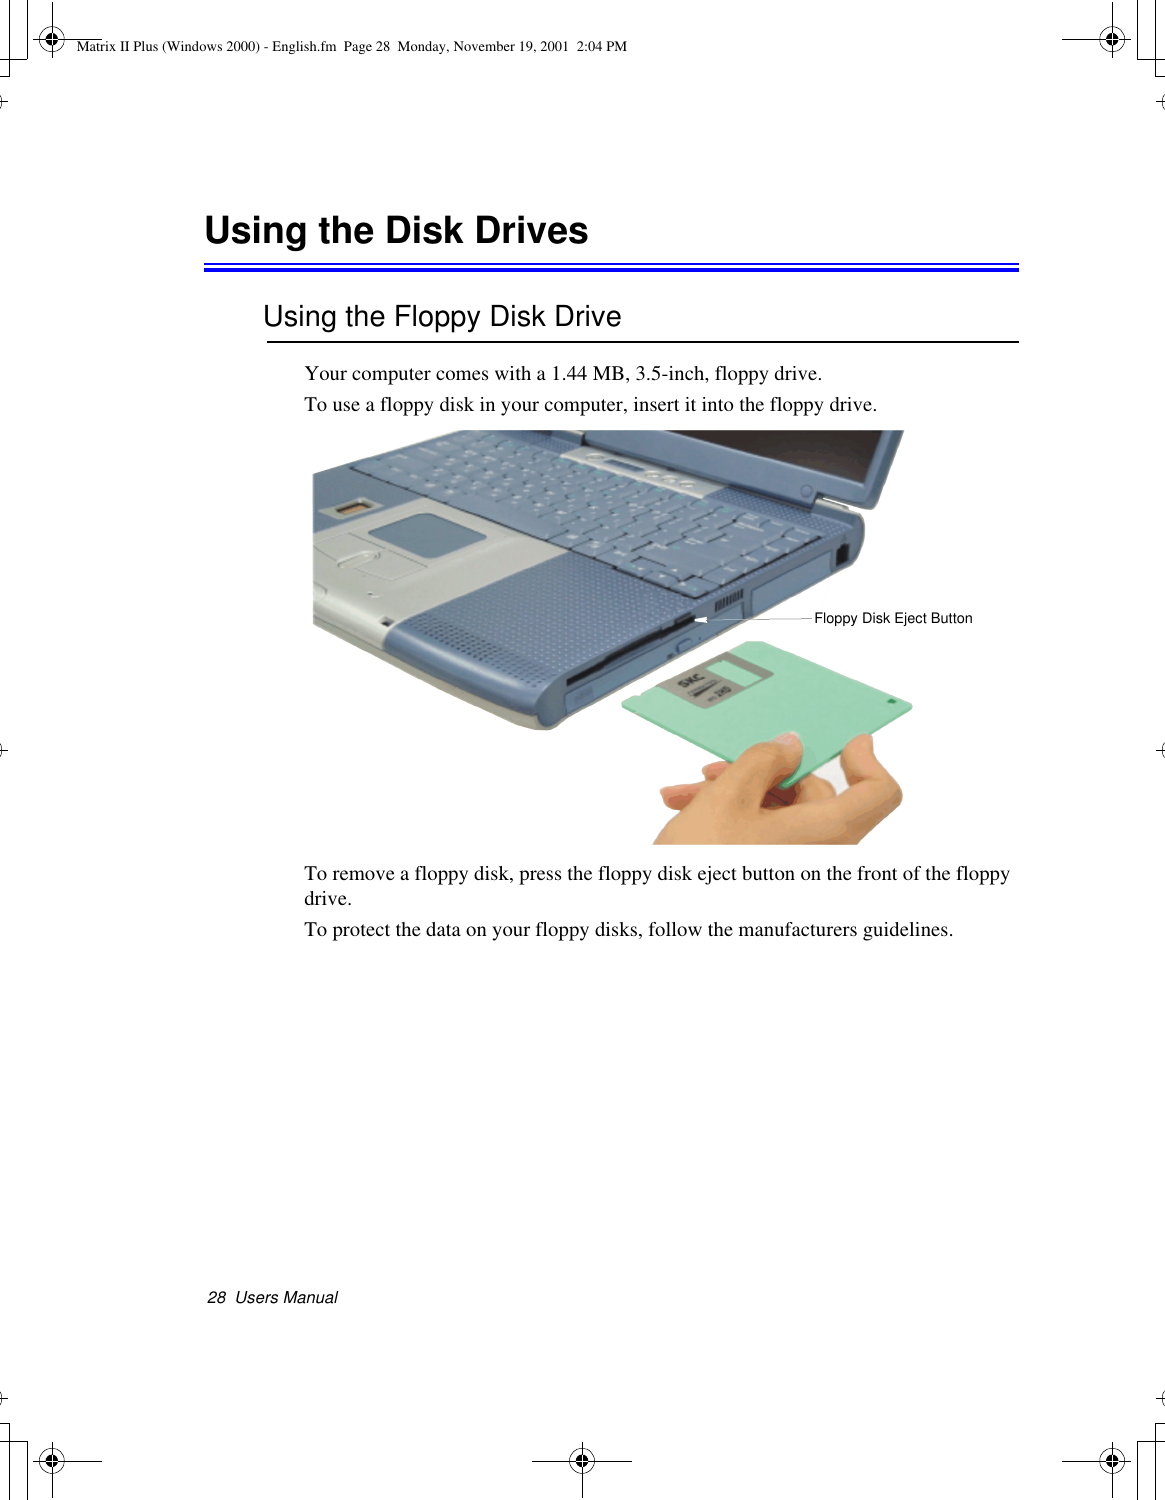 28  Users ManualUsing the Disk DrivesUsing the Floppy Disk DriveYour computer comes with a 1.44 MB, 3.5-inch, floppy drive.To use a floppy disk in your computer, insert it into the floppy drive. To remove a floppy disk, press the floppy disk eject button on the front of the floppy drive.To protect the data on your floppy disks, follow the manufacturers guidelines.Floppy Disk Eject ButtonMatrix II Plus (Windows 2000) - English.fm  Page 28  Monday, November 19, 2001  2:04 PM